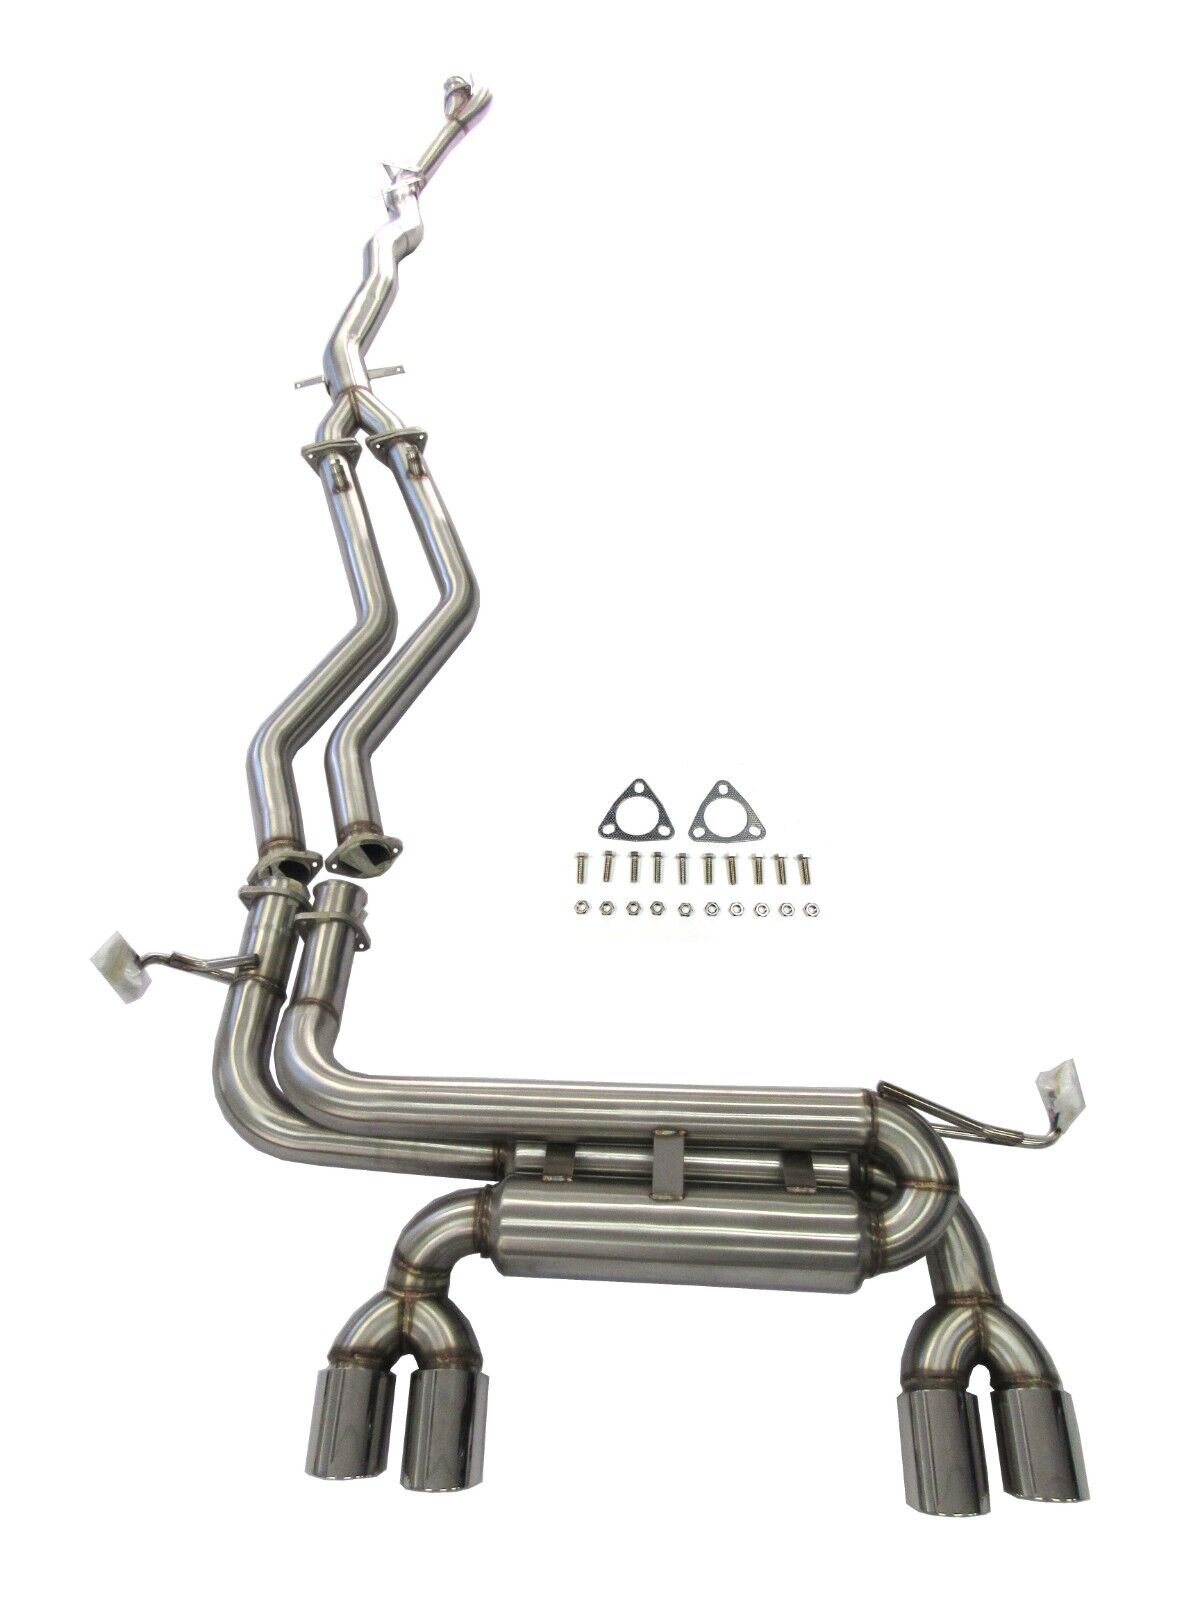 S/S Catback Exhaust Fits For 2001-2006 BMW M3 E46 3.2L By Becker 